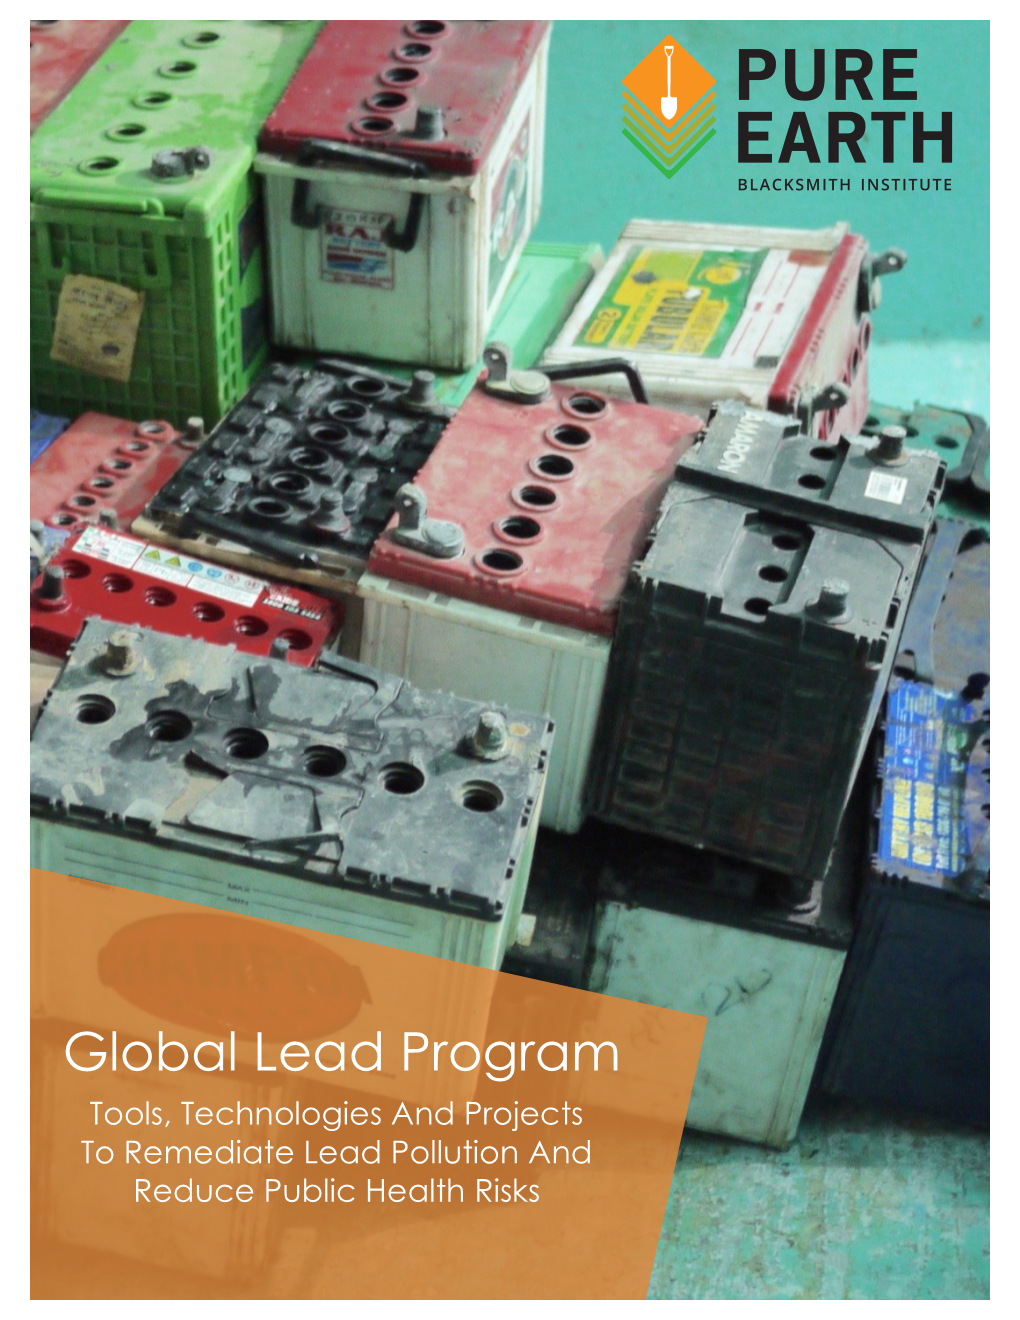 Global Lead Program Tools, Technologies and Projects to Remediate Lead Pollution and Reduce Public Health Risks About Pure Earth